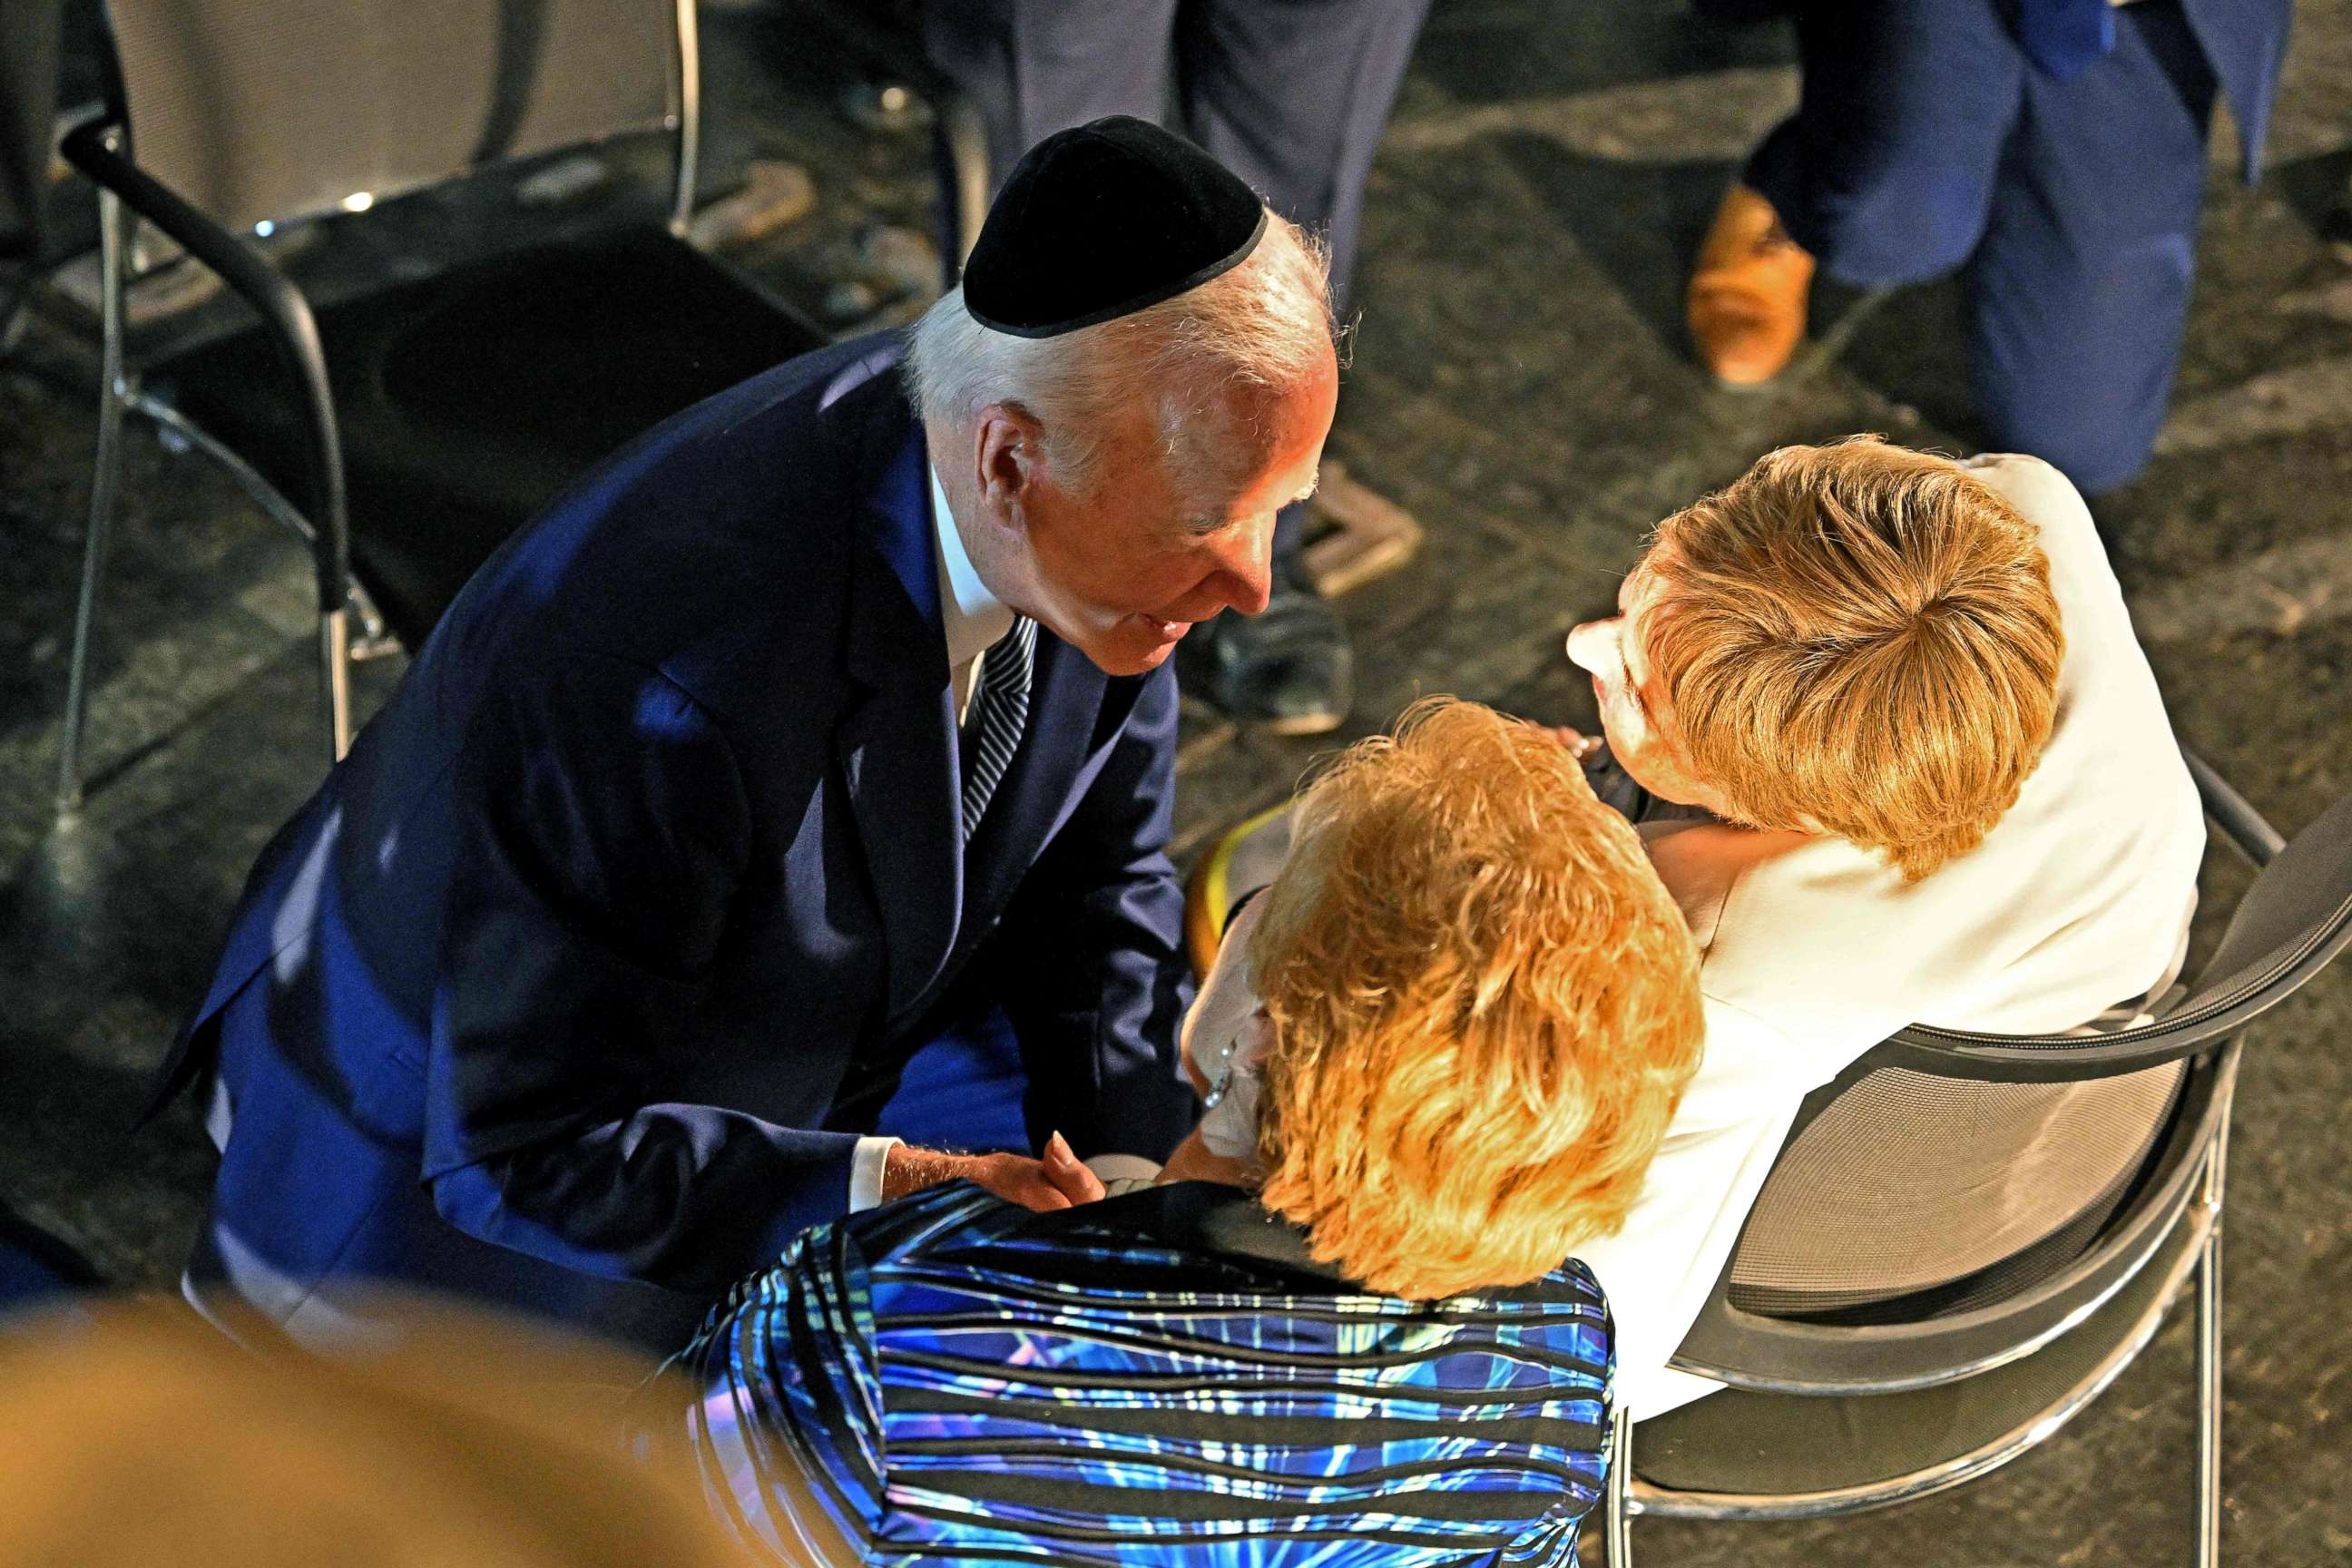 PHOTO: President Joe Biden speaks with Holocaust survivors Giselle Cycowicz (R) and Rena Quint in the Hall of Remembrance during a visit to the Yad Vashem Holocaust Remembrance Center in Jerusalem on July 13, 2022.